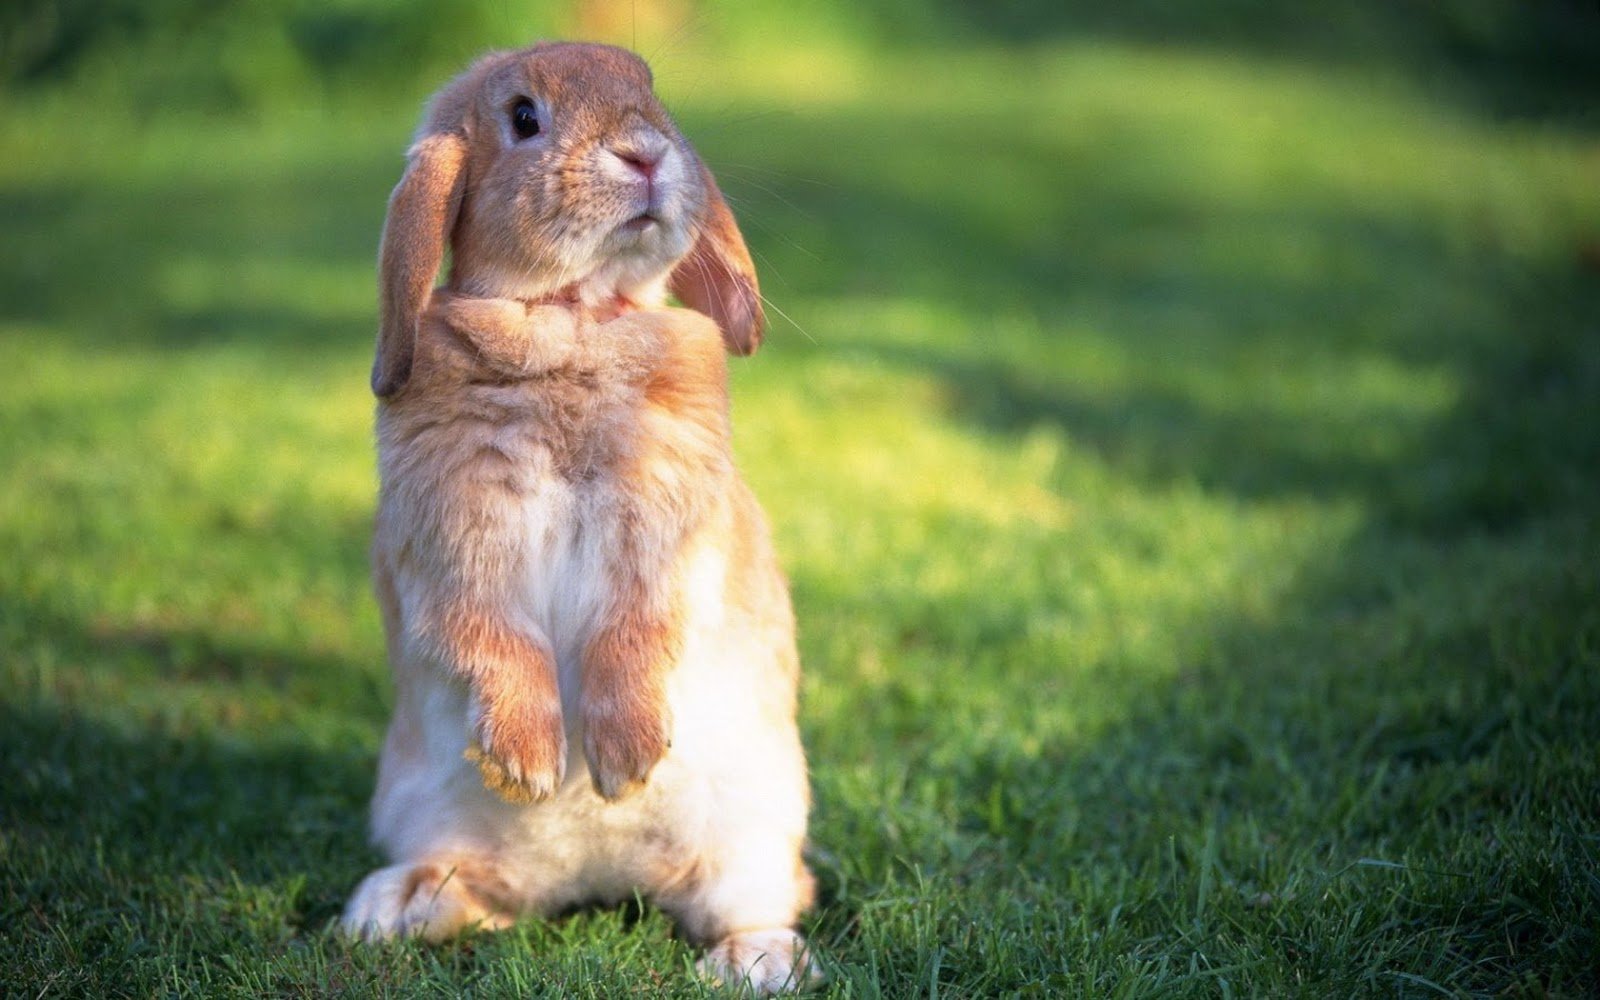 All Wallpapers Cute Rabbit hd Wallpapers 2013 1600x1000